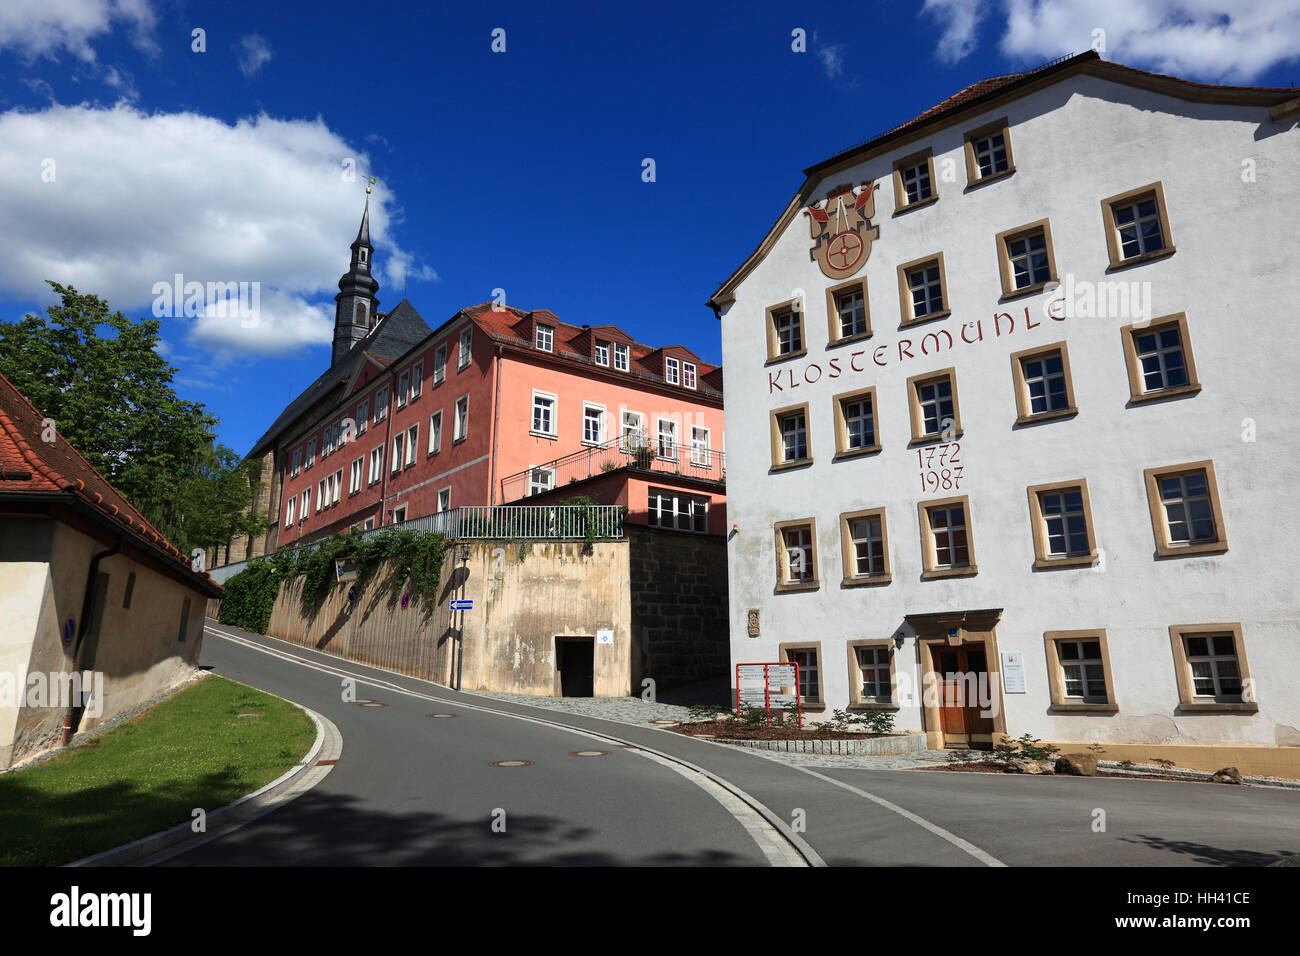 former monastery of Himmelkron, outside view, district of  Kulmbach, Upper Franconia, Bavaria, Germany Stock Photo